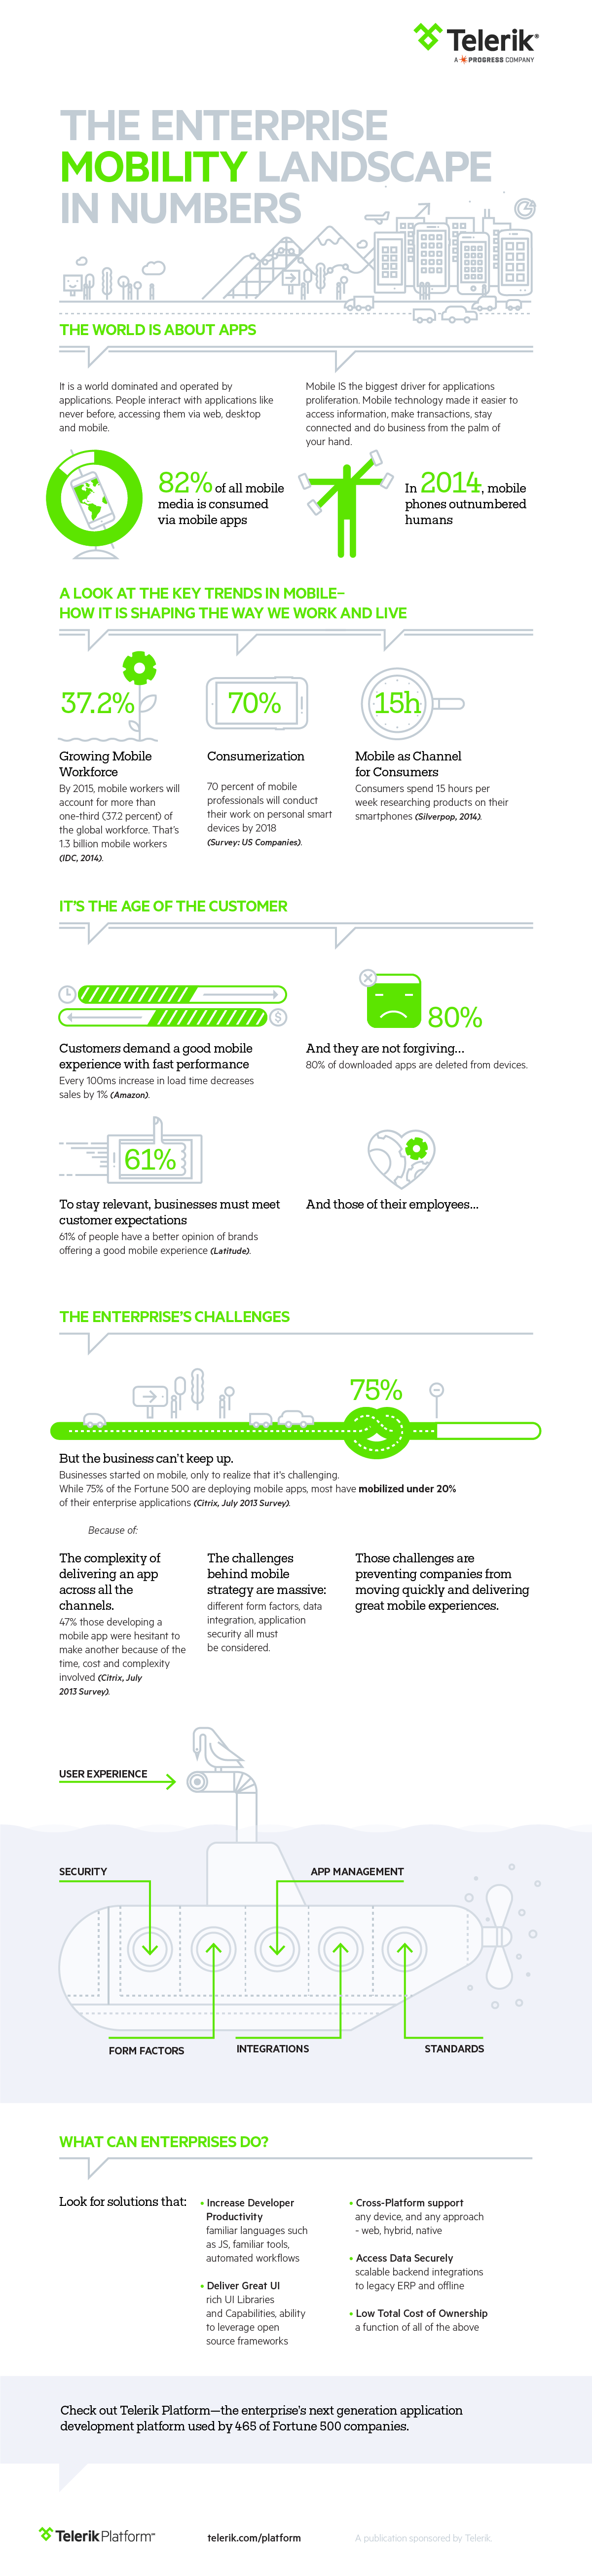 Telerik Infographic - The Enterprise Mobility Landscape in Numbers